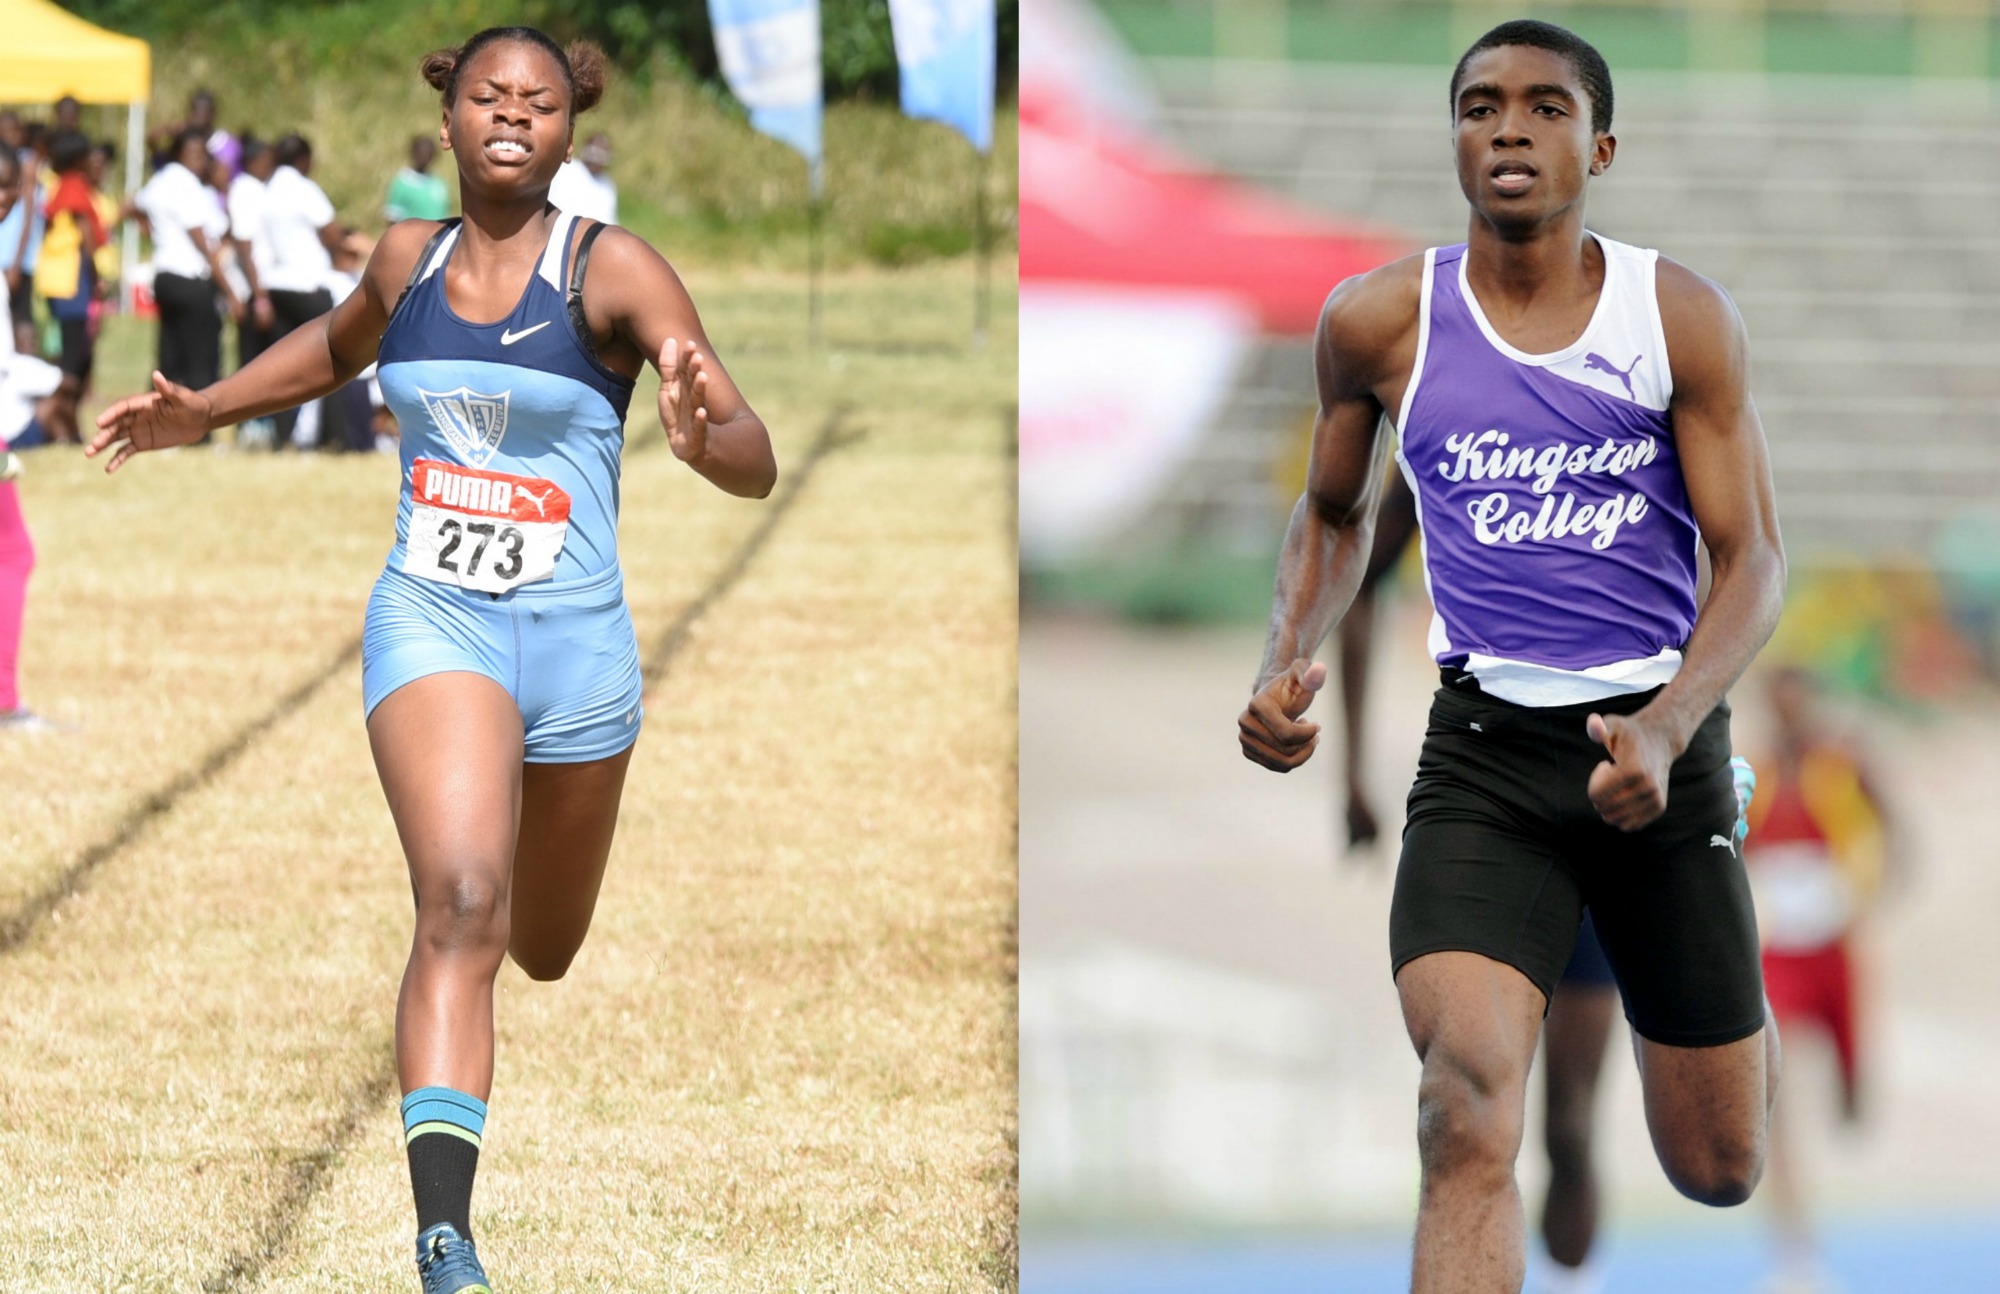 FIVE TO WATCH #taChamps2017 #Champs2017